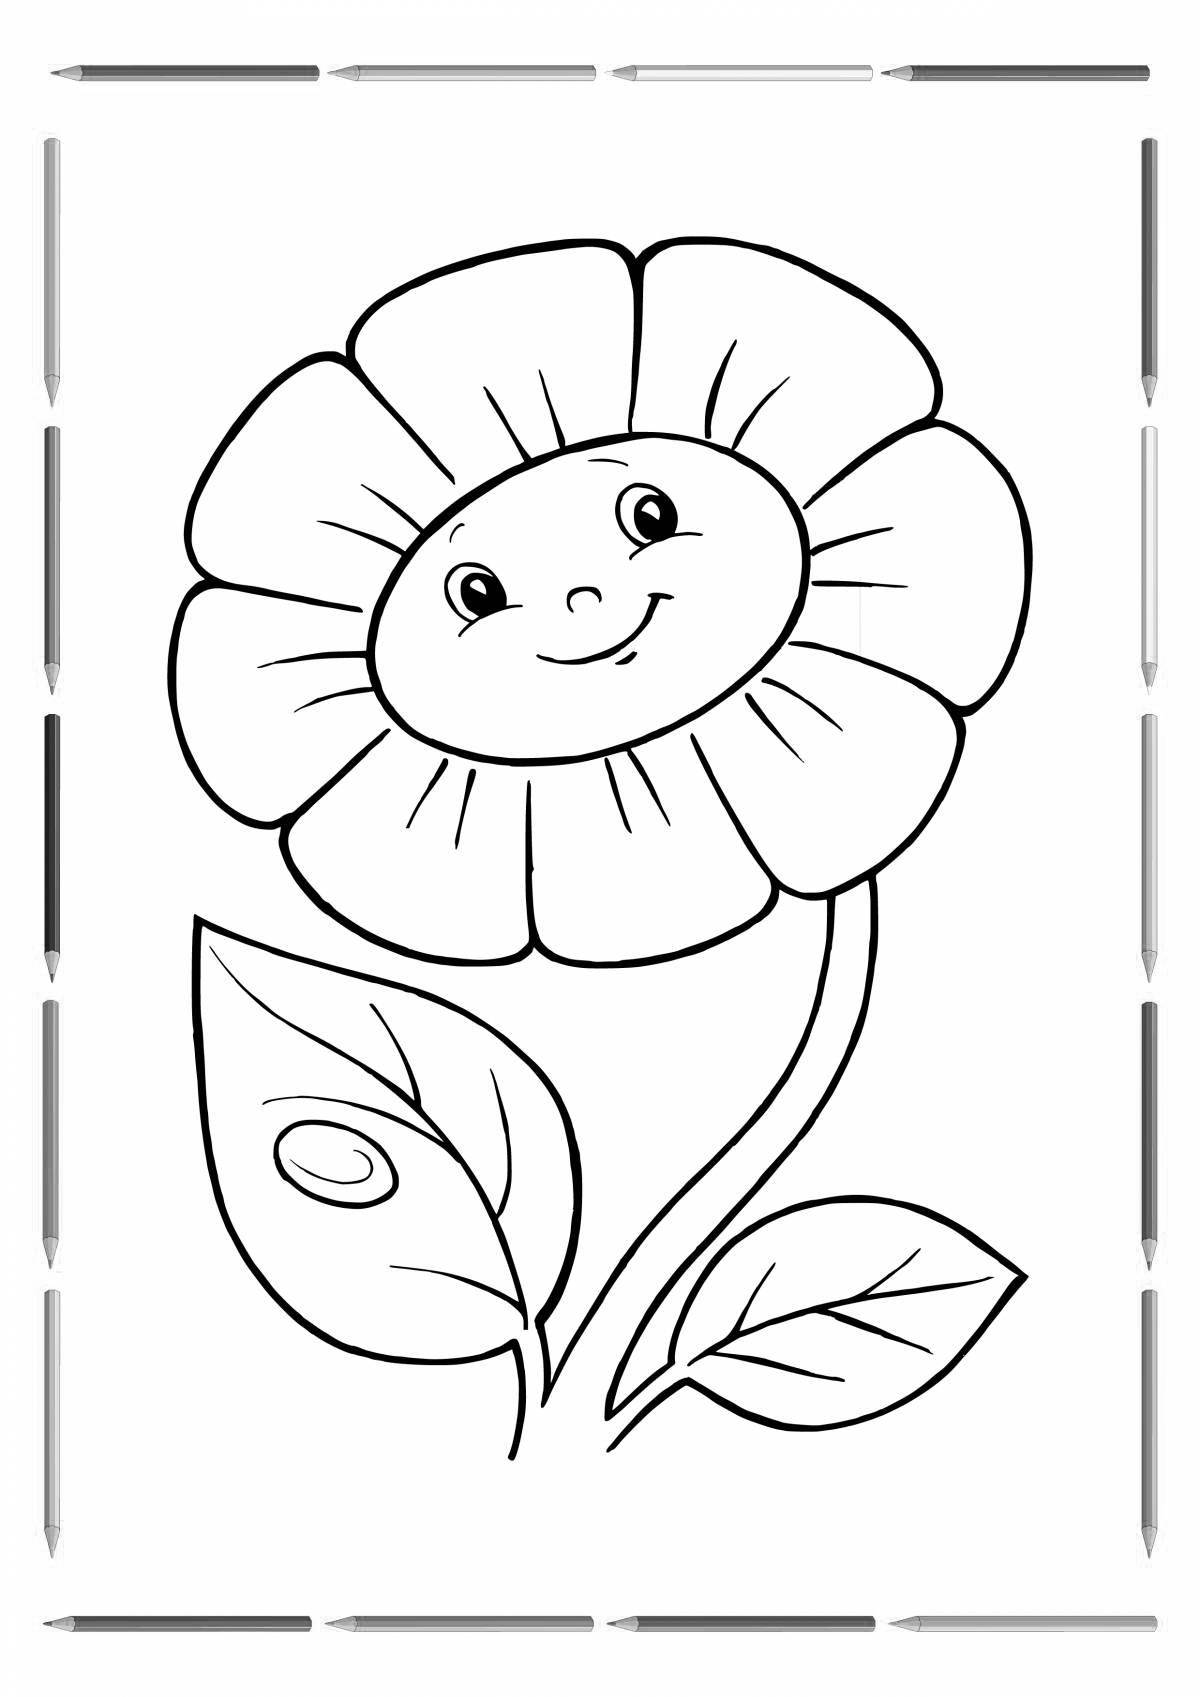 Coloring book with seven colors for the little ones